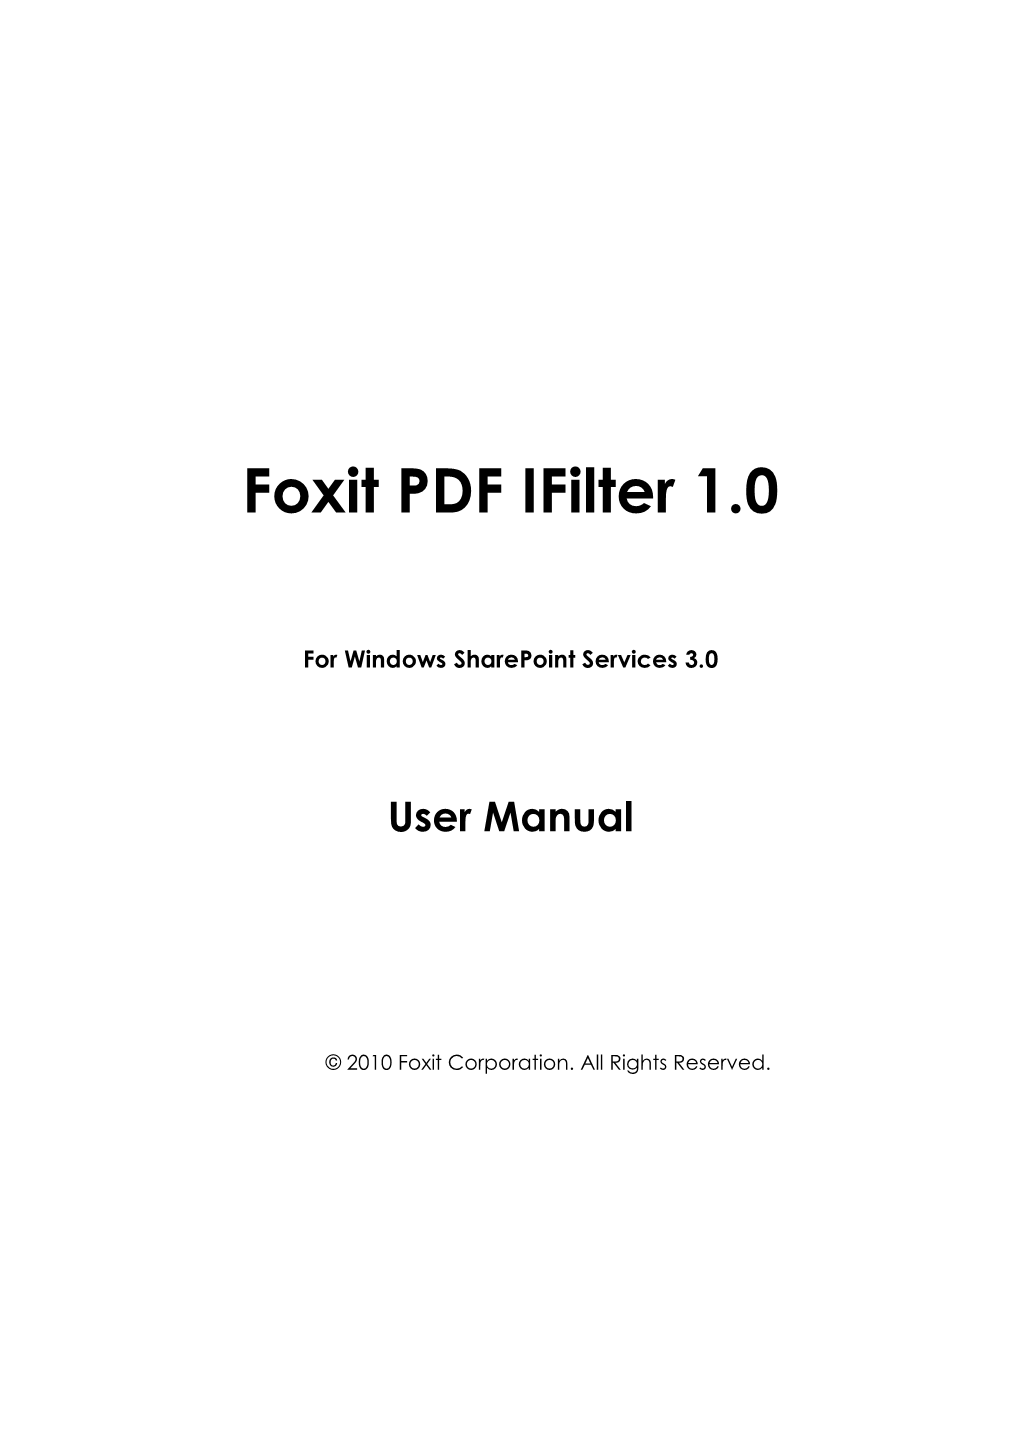 Foxit PDF Ifilter 1.0 for WSS User Manual